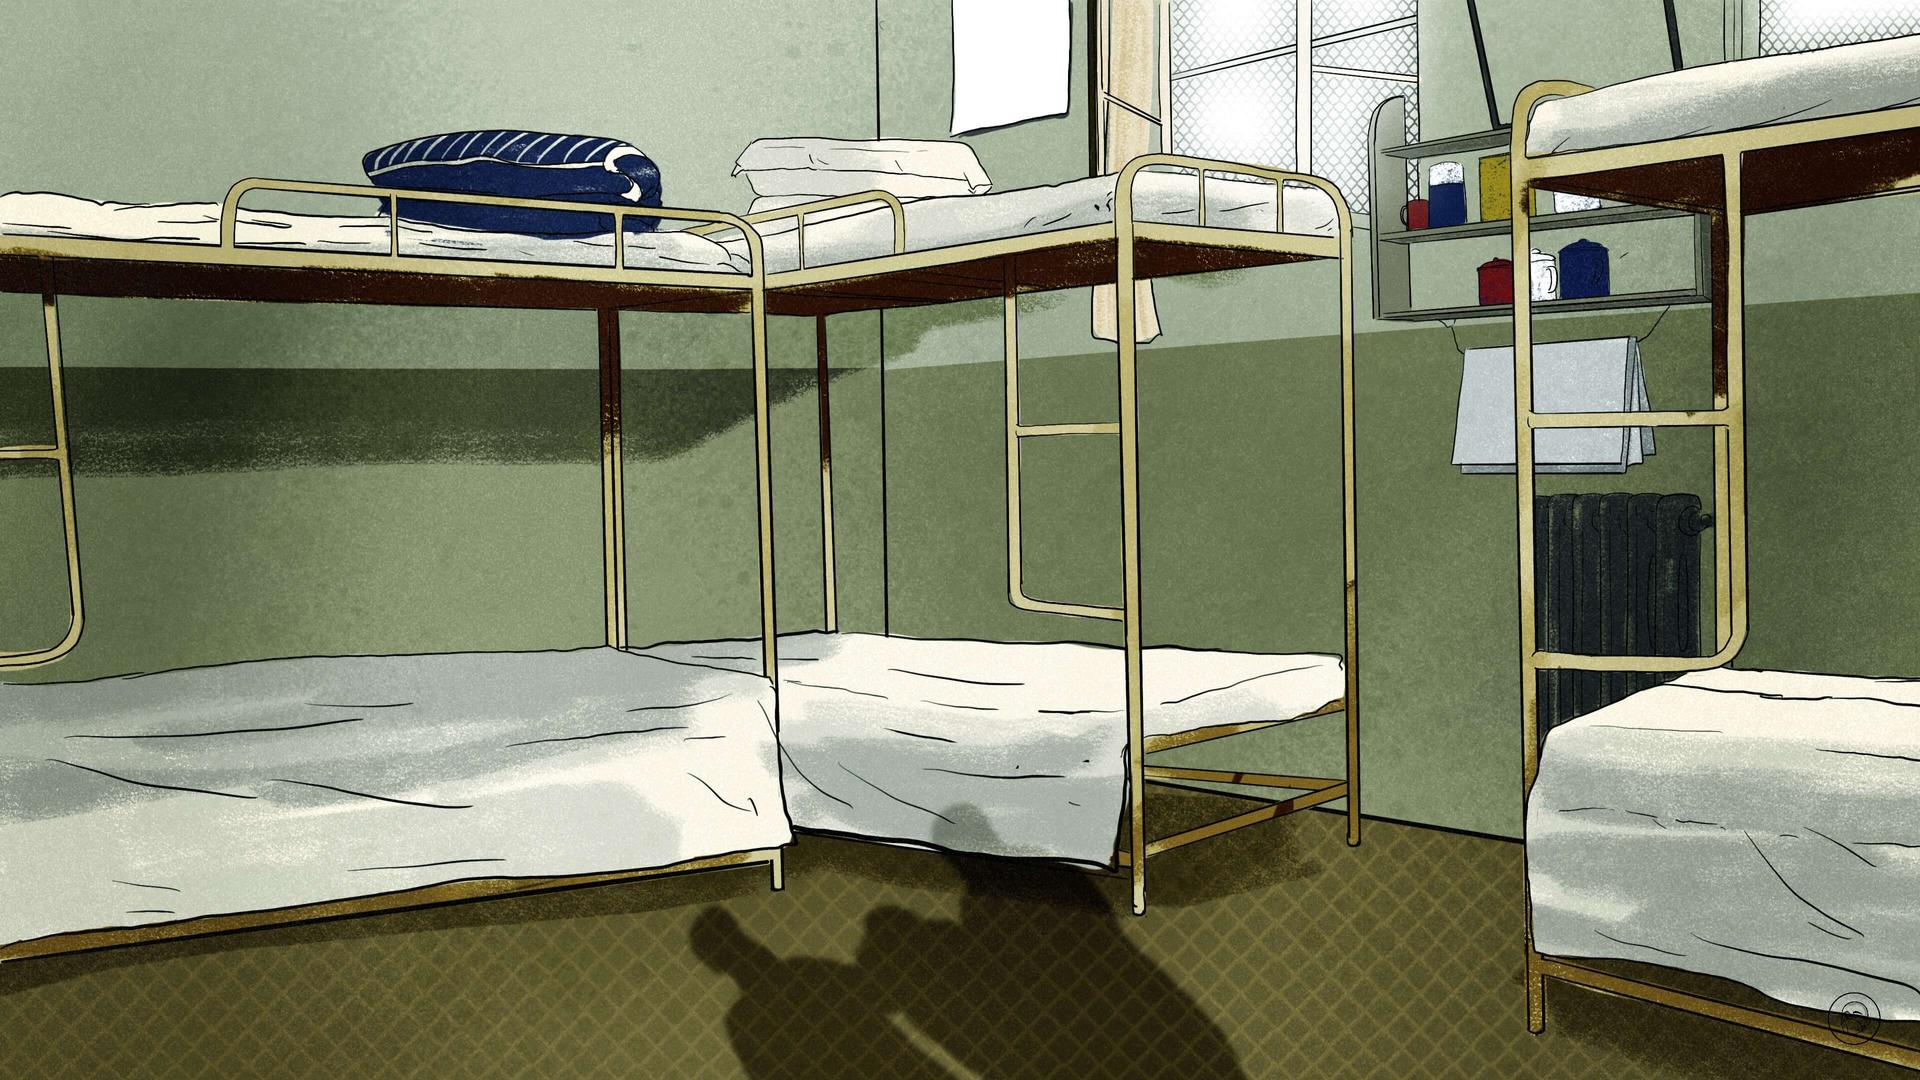 An illustration by Alex Santafe depicting dormitory with bunkbeds